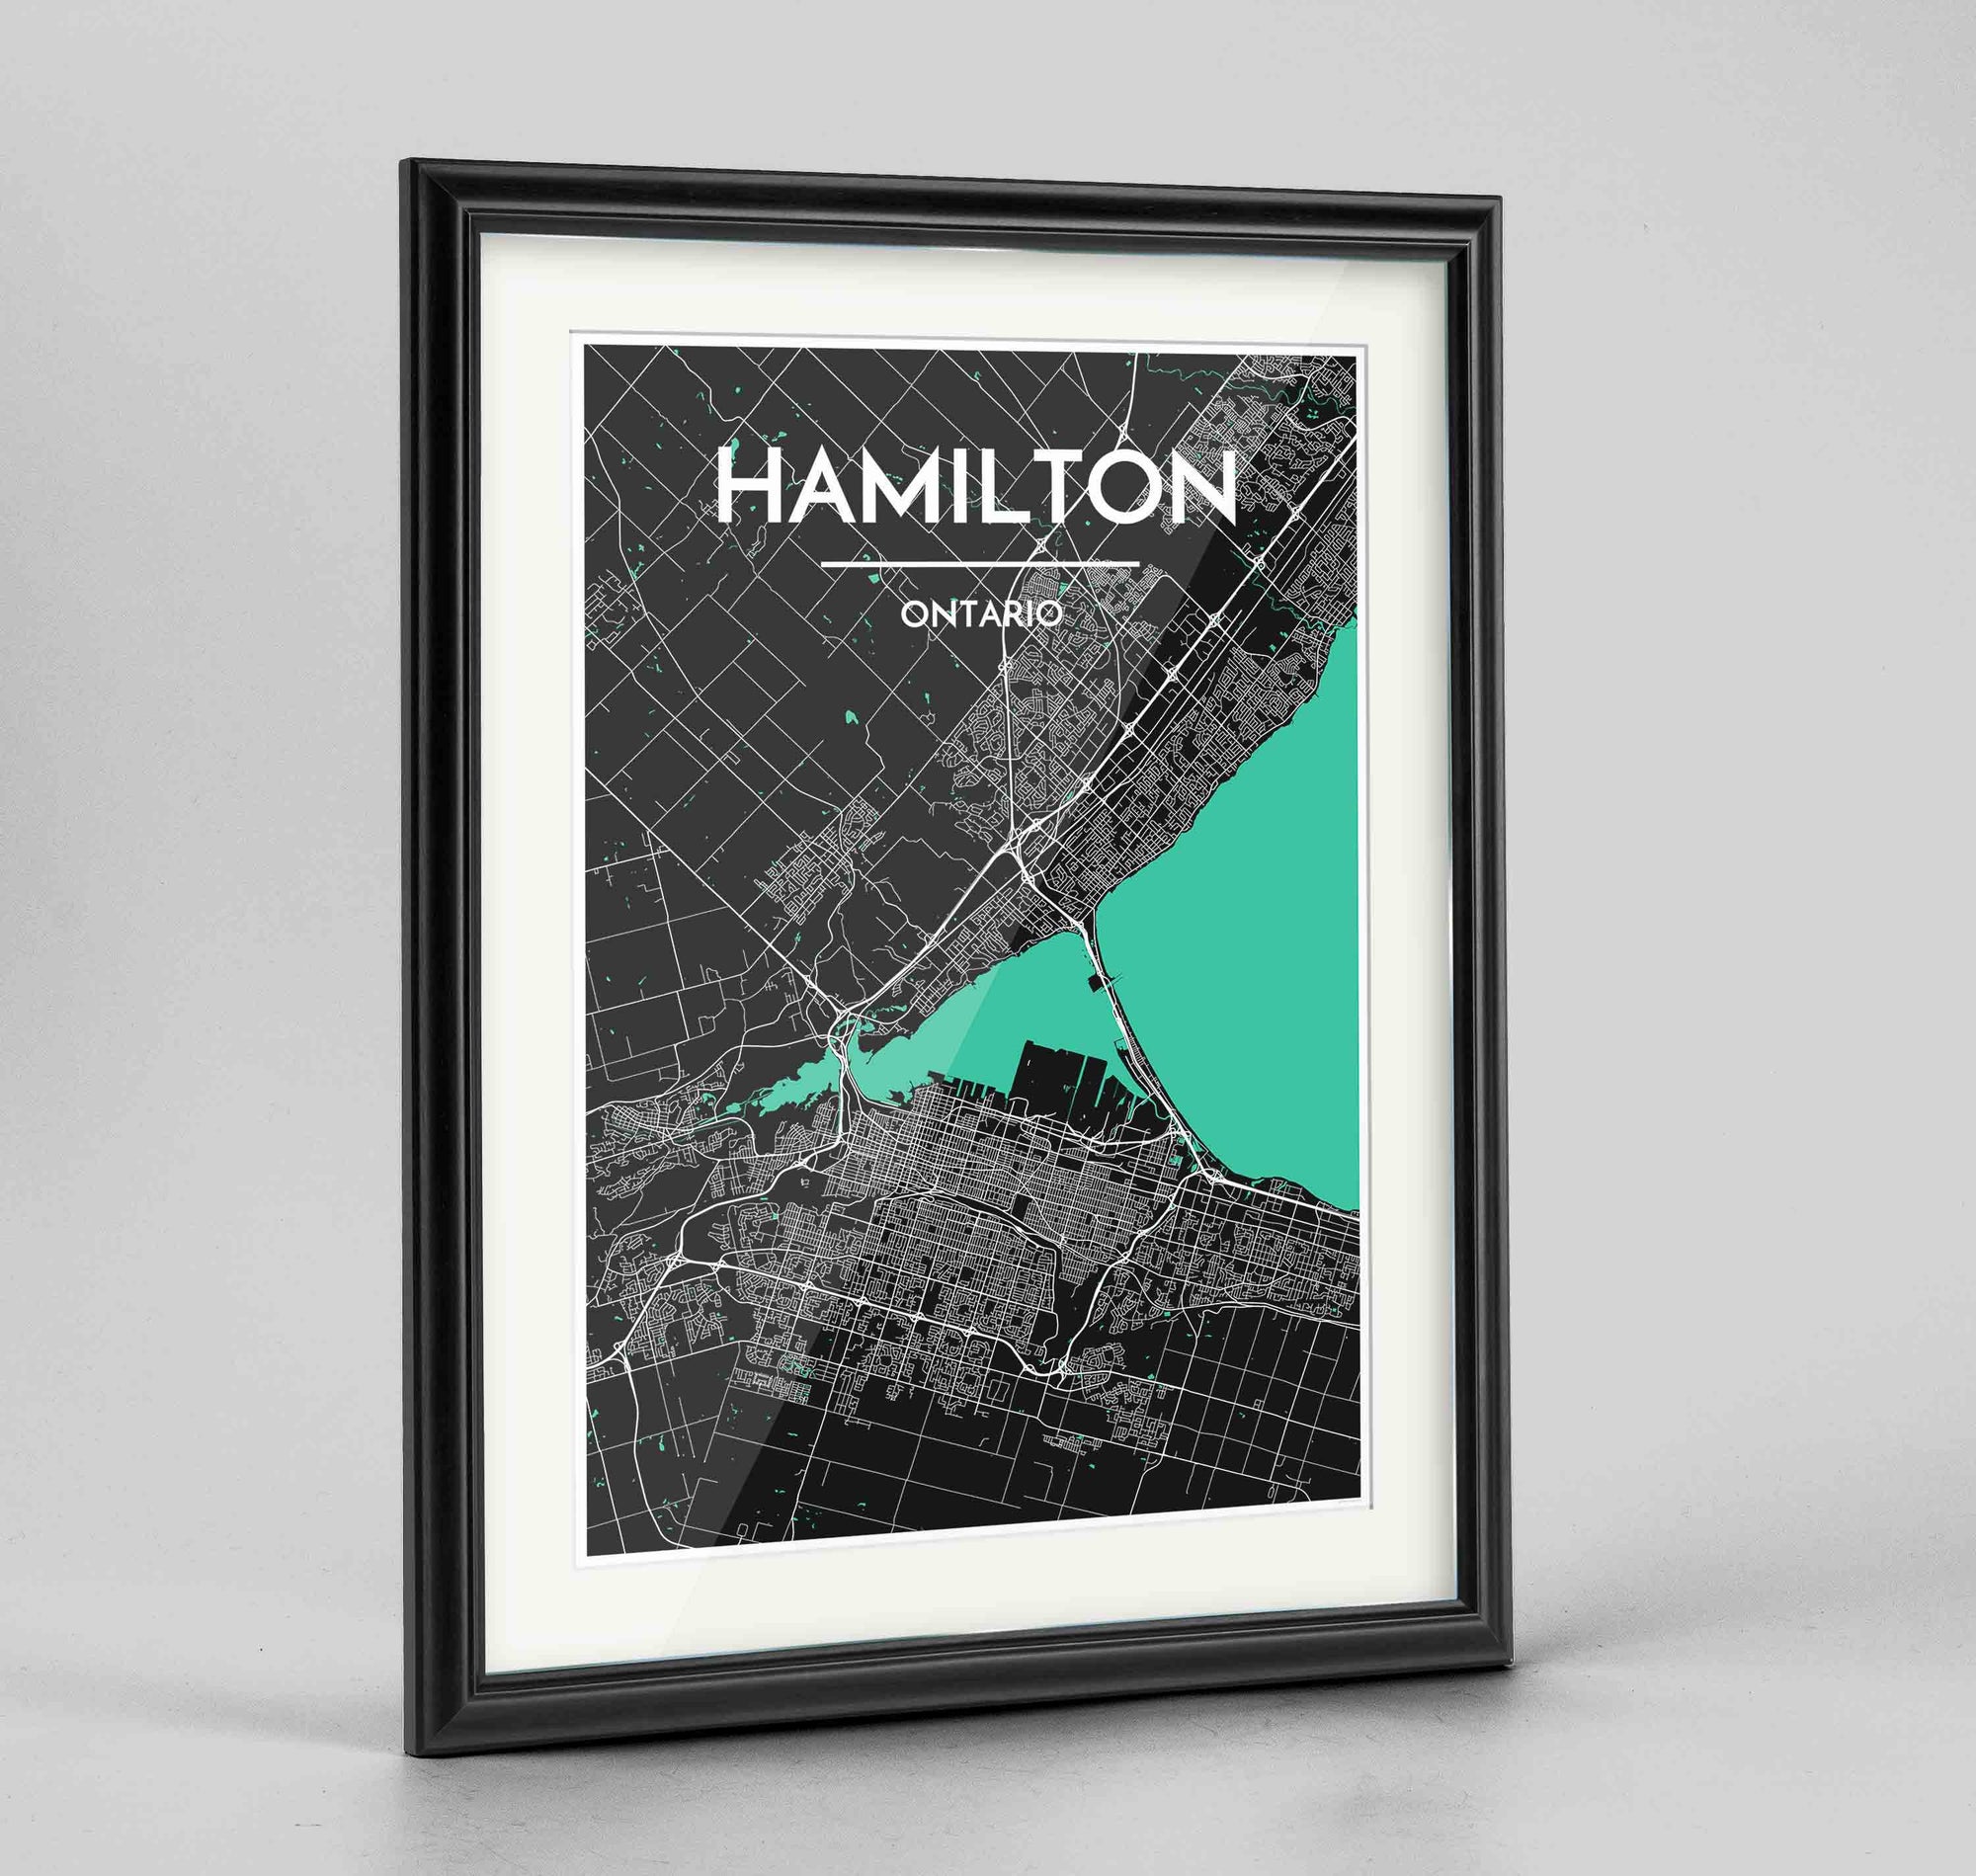 Framed Hamilton City Map 24x36" Traditional Black frame Point Two Design Group